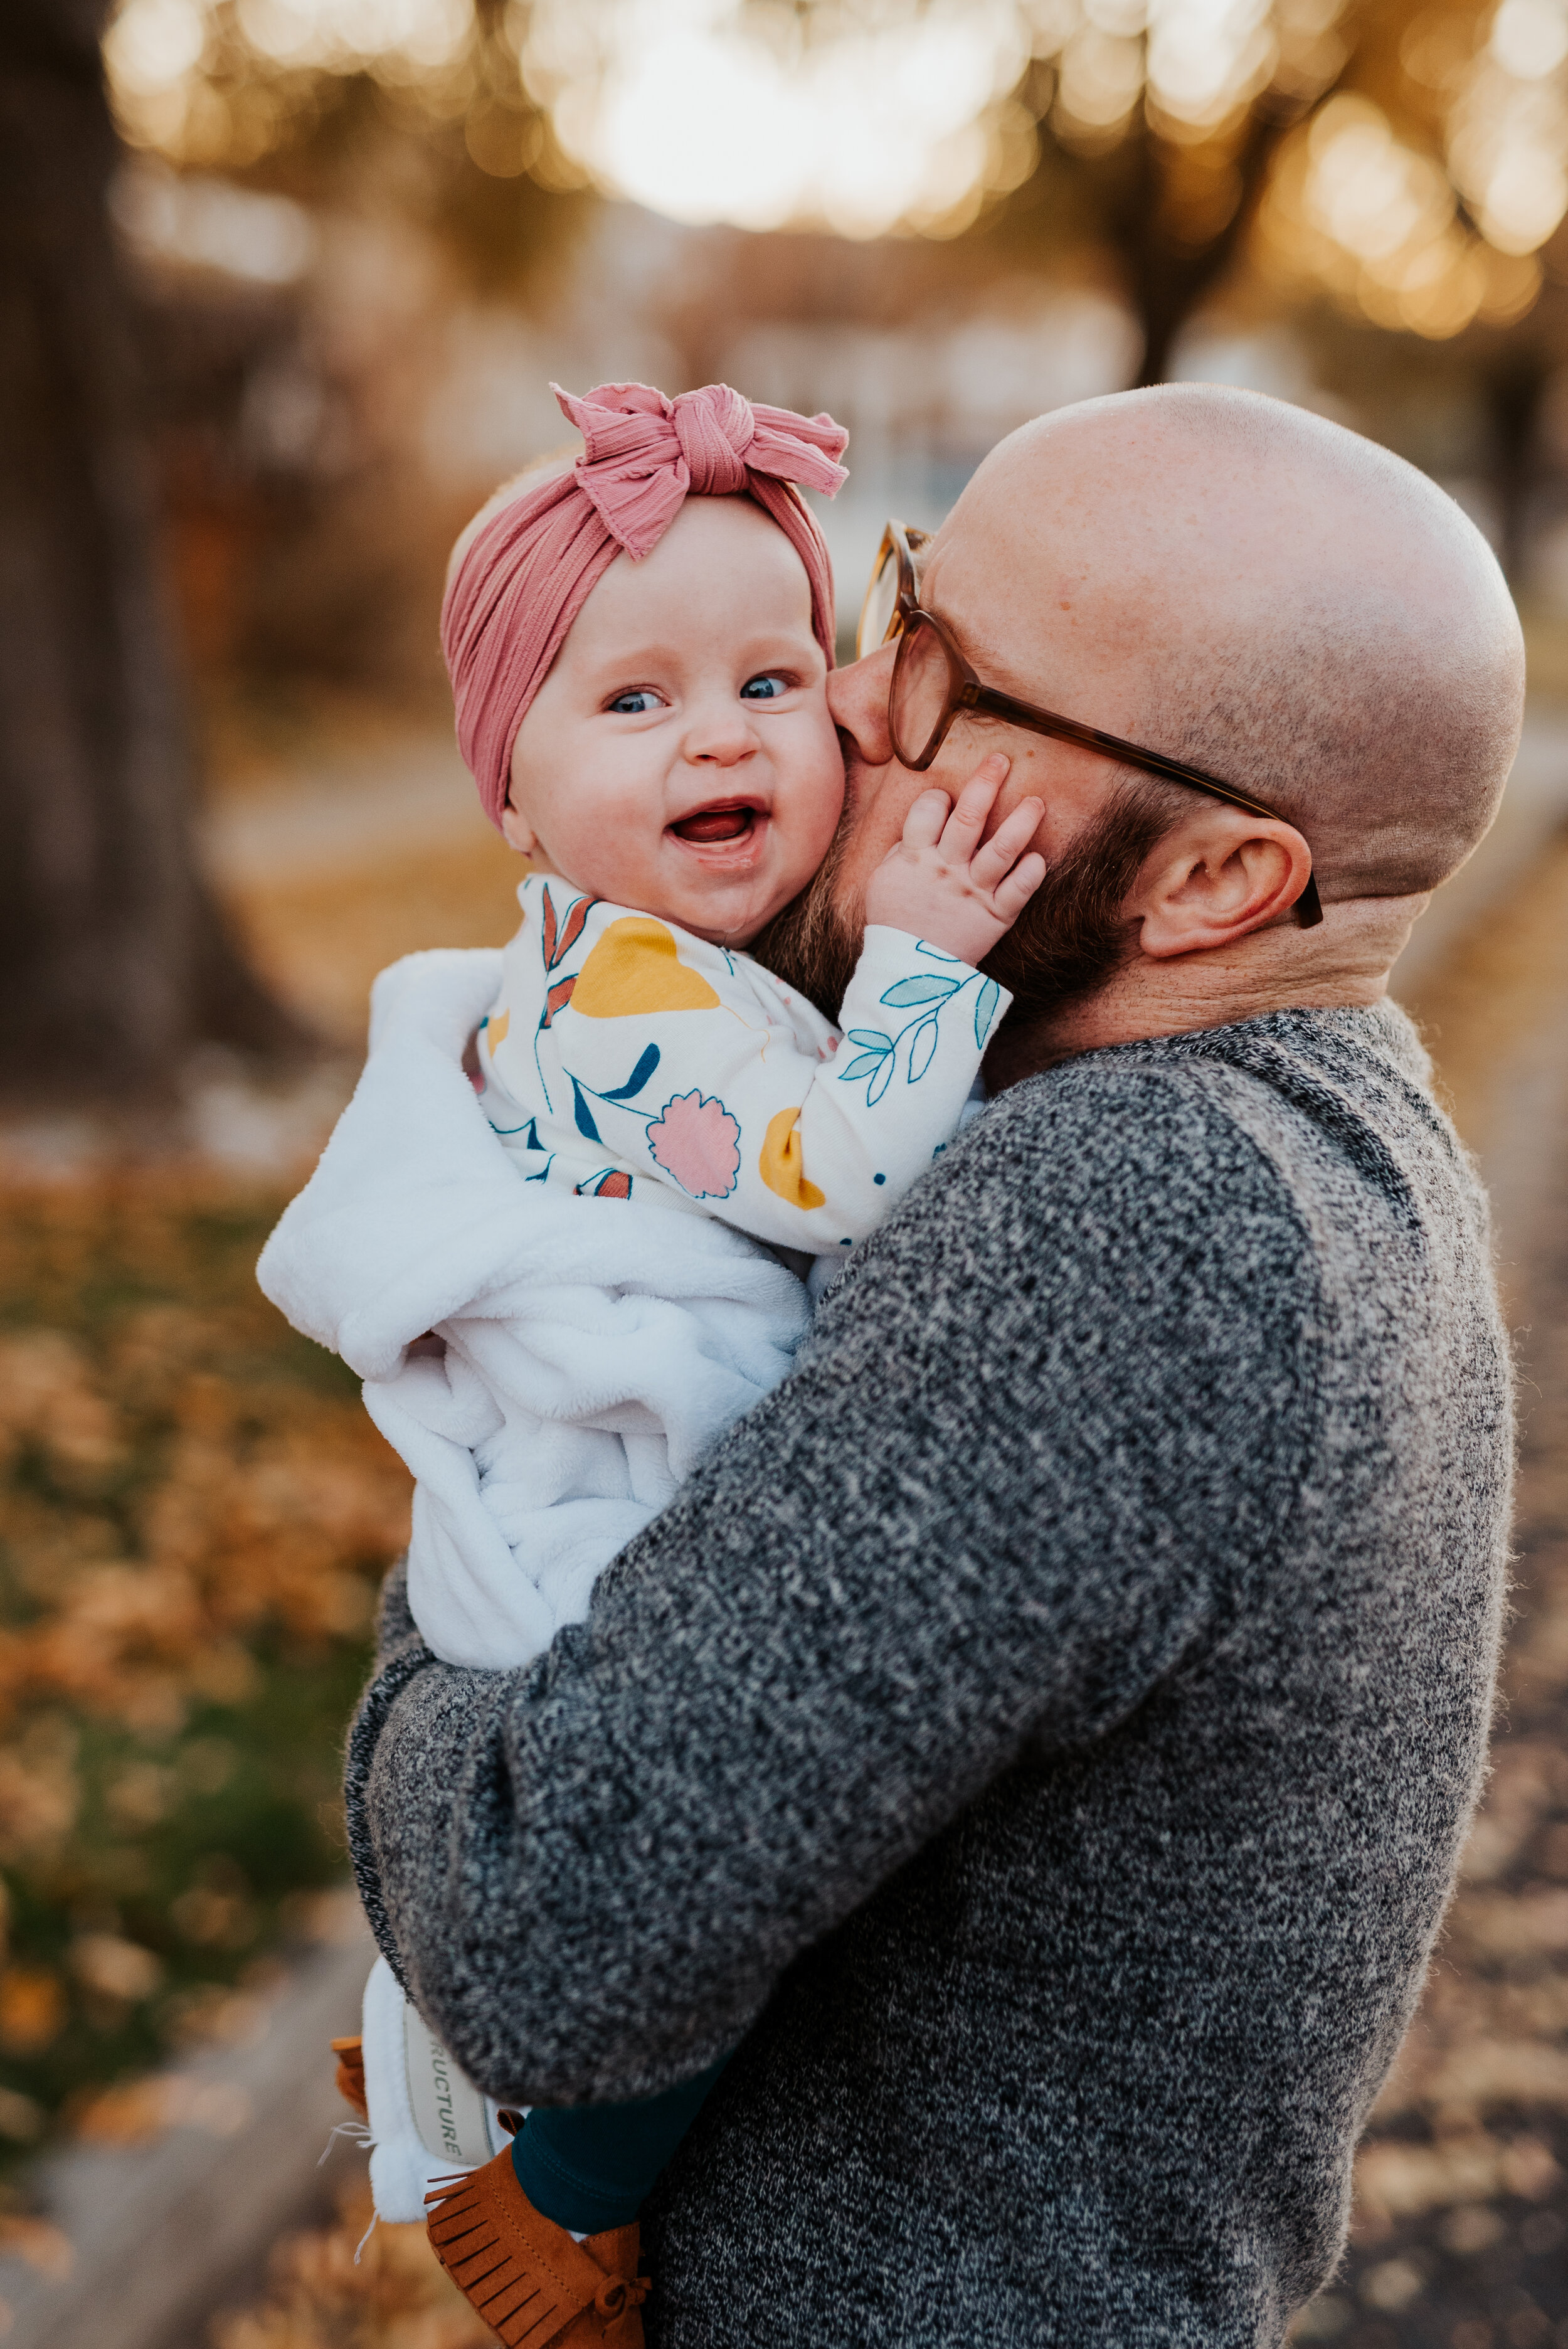  family photography infant photos dusty rose pink baby bling headband bow floral onsie daddy daughter photos kissing smiling baby authentic posing professional logan utah photographer fall photos holding baby wrapped in a blanket #loganutah #loganutahphotographer #cachevalleyphotographer #familyphotographer #cachevalleyutah #familyphotography #flashesofdelight #parenthood #parenting #thehappynow #photography  